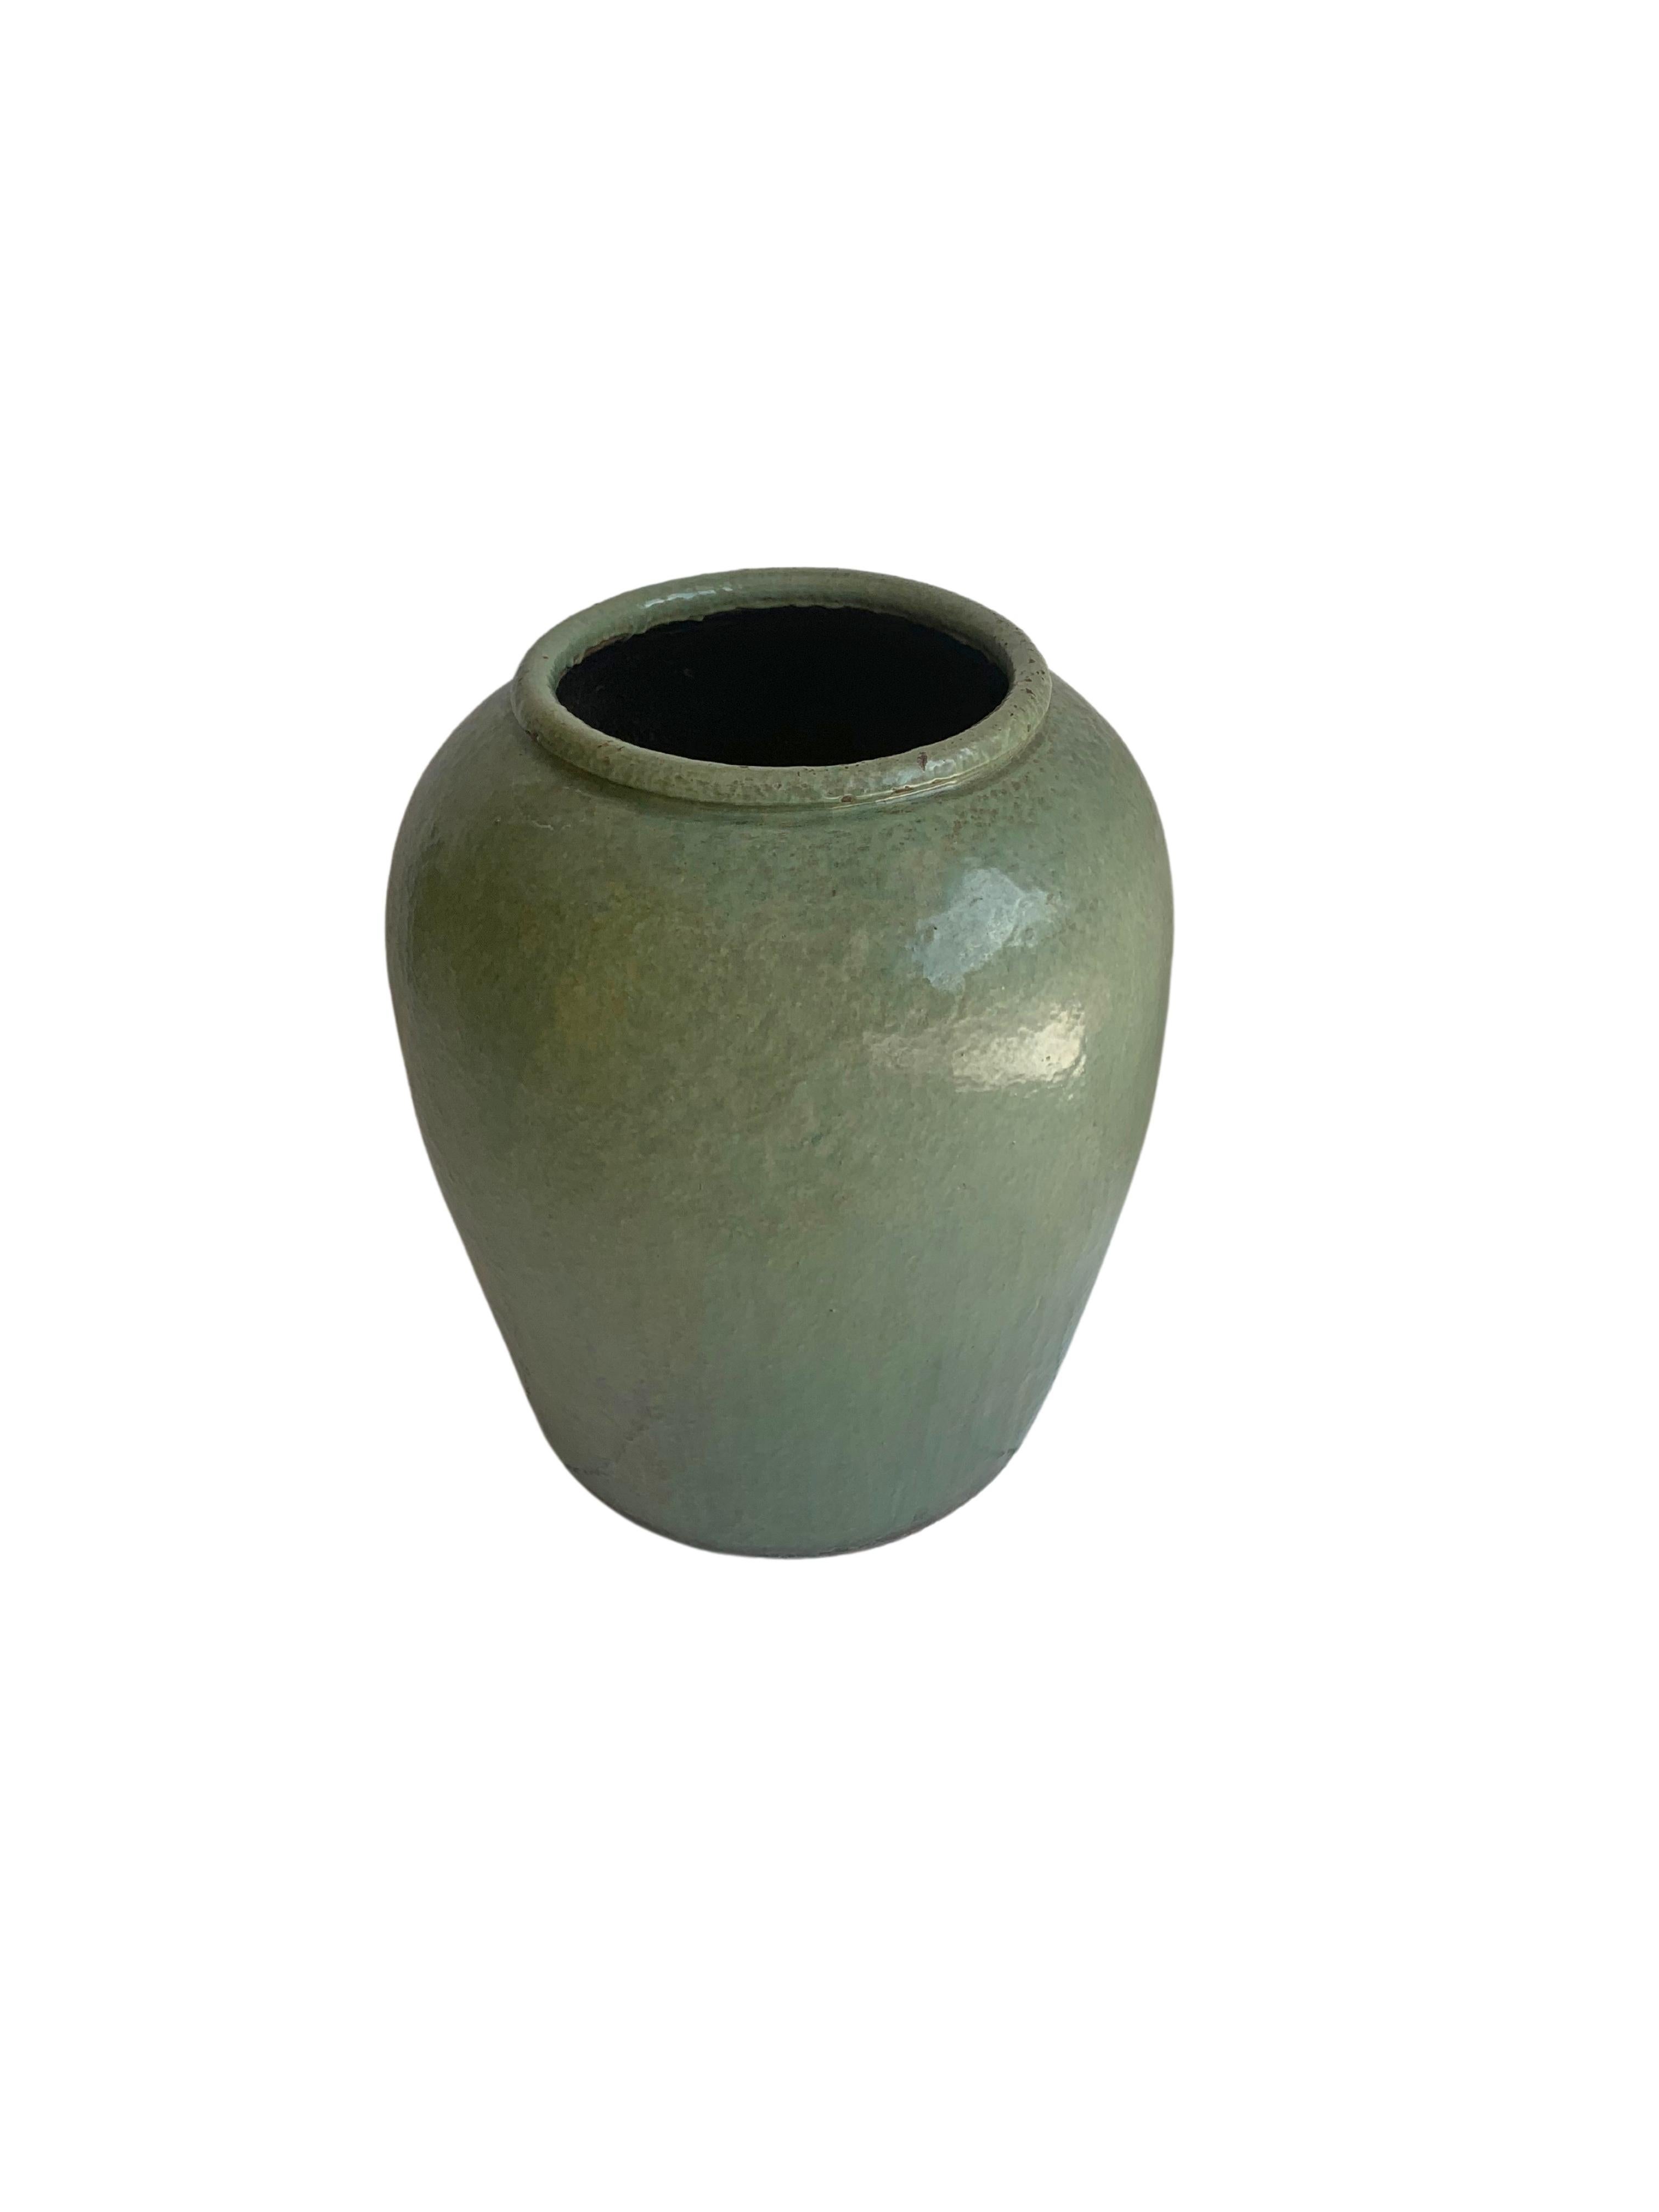 This large glazed Chinese ceramic jar from the turn of mid 20th Century was once used for pickling various foods. It features a wonderful green / turquoise glazed finish and outer surface. A great example of Chinese pottery, its neutral colours make